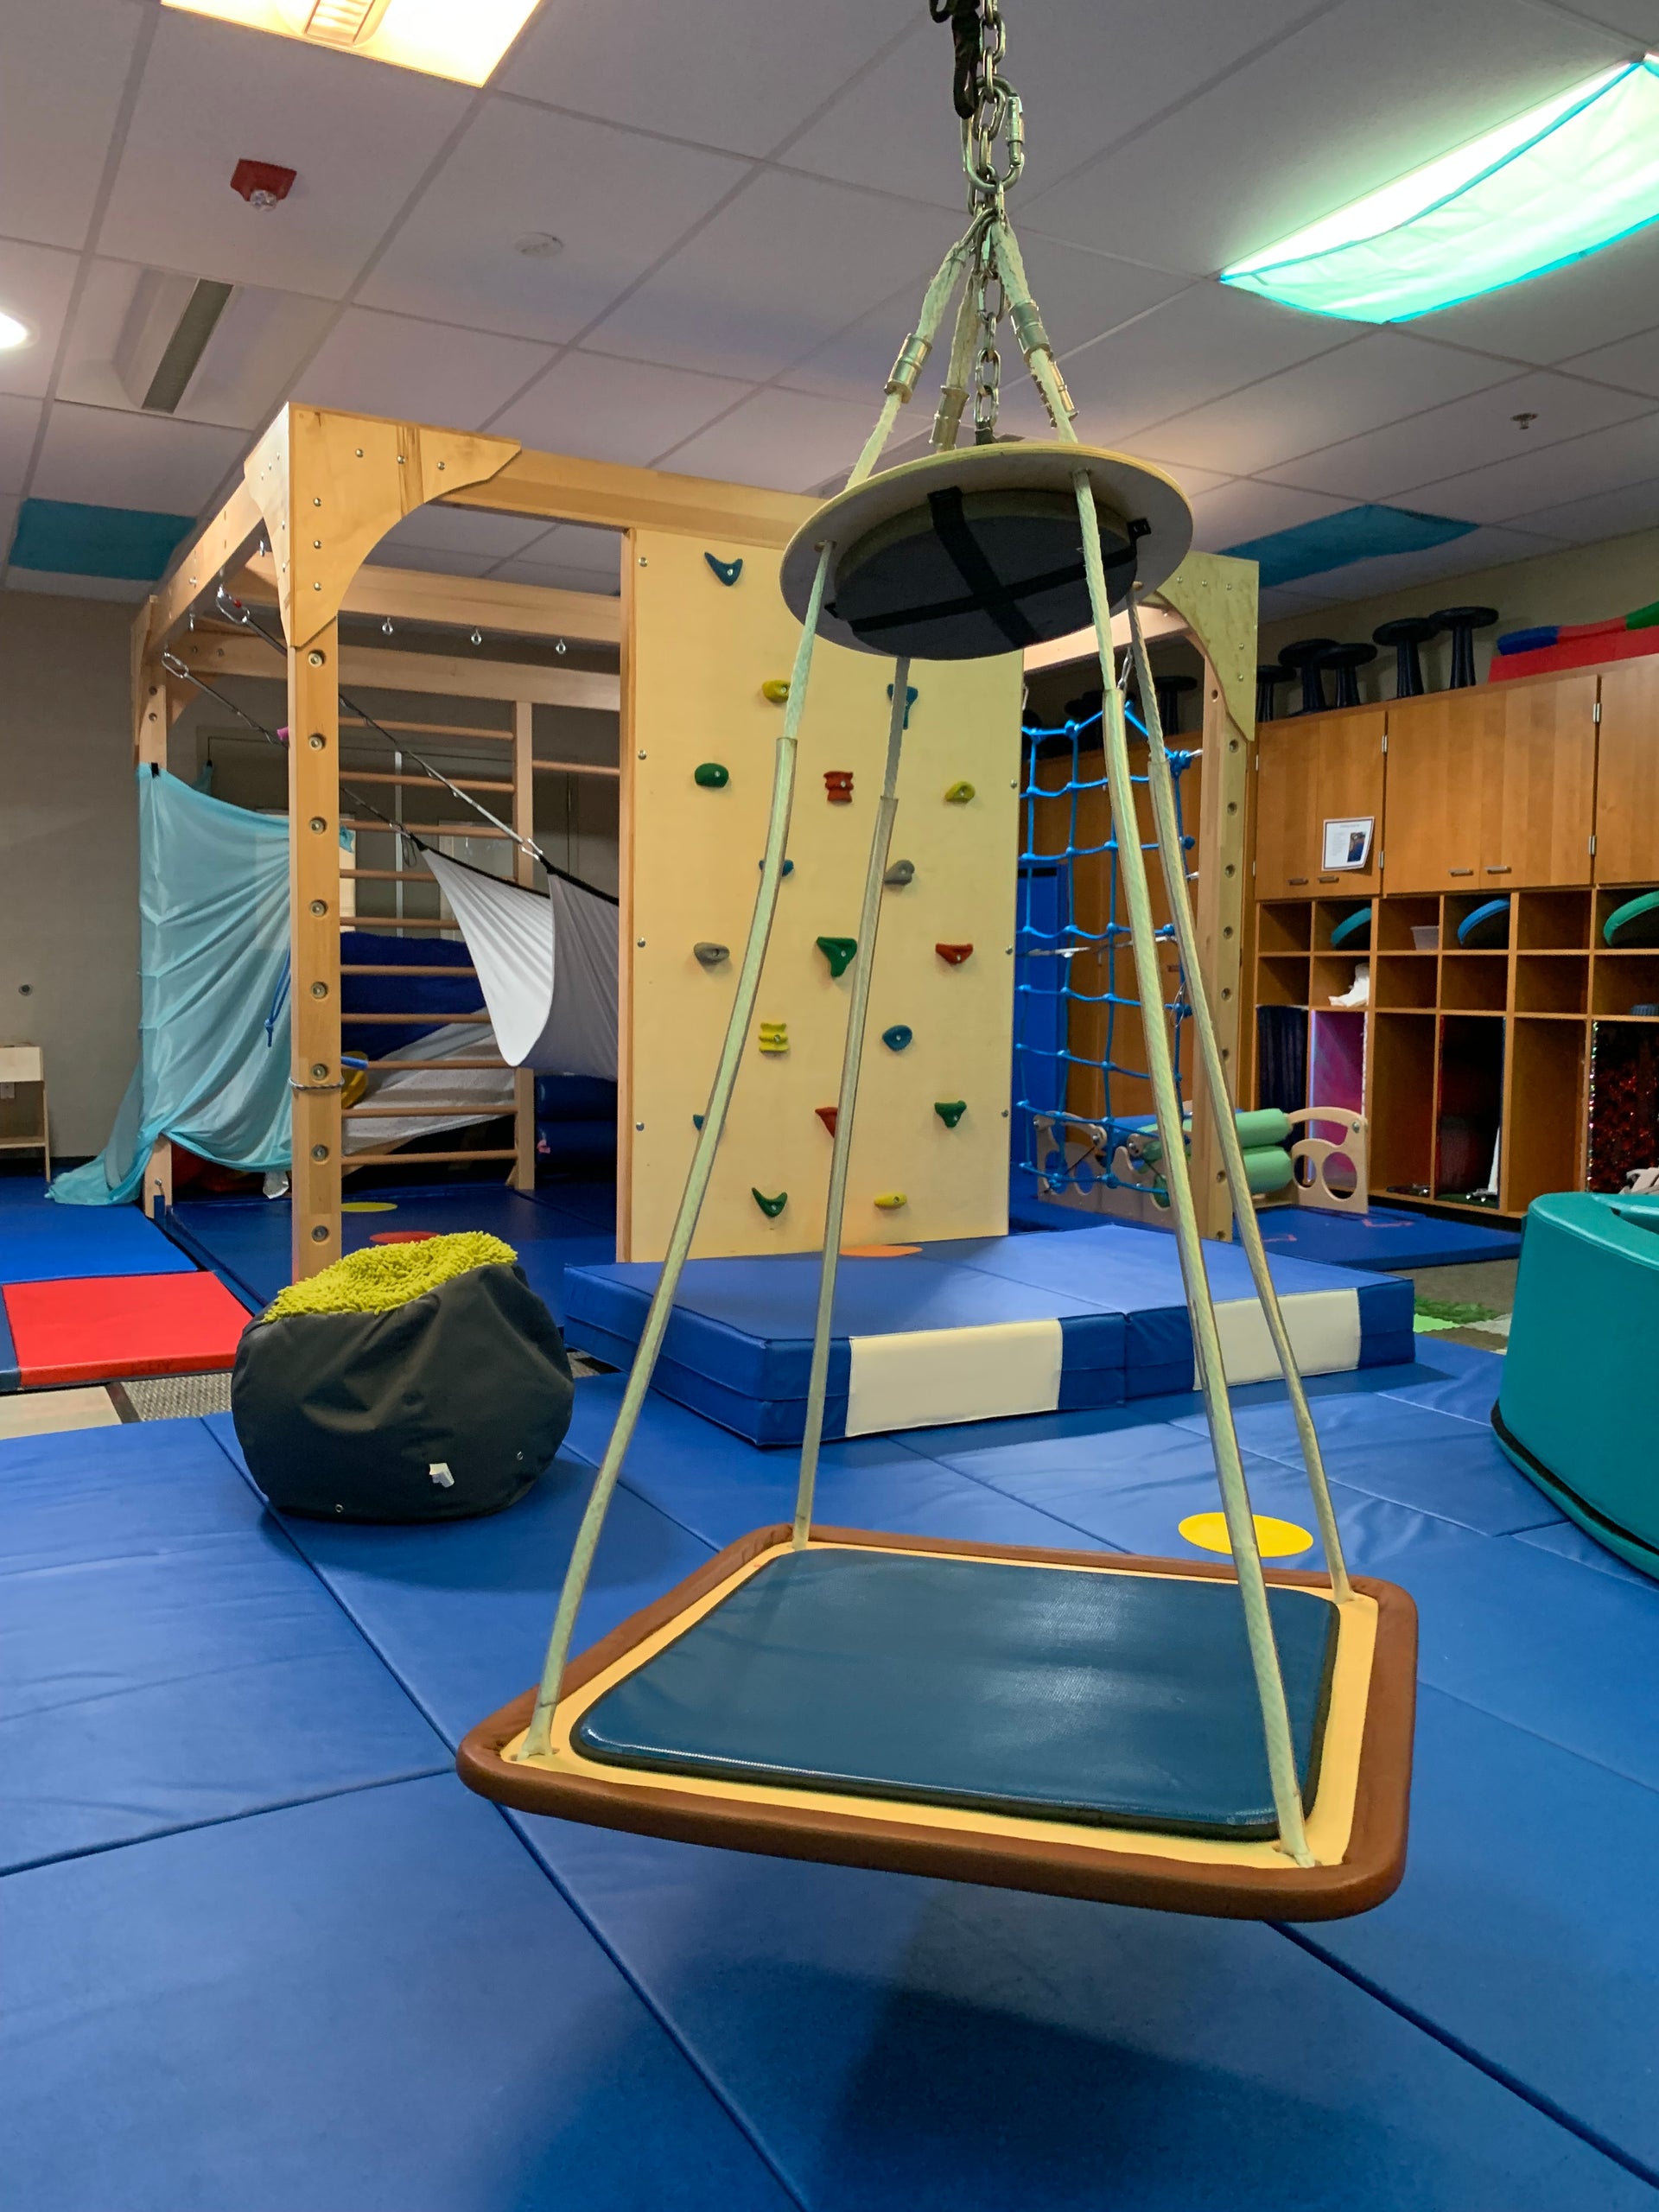 Sensory gym with swing and climbing wall